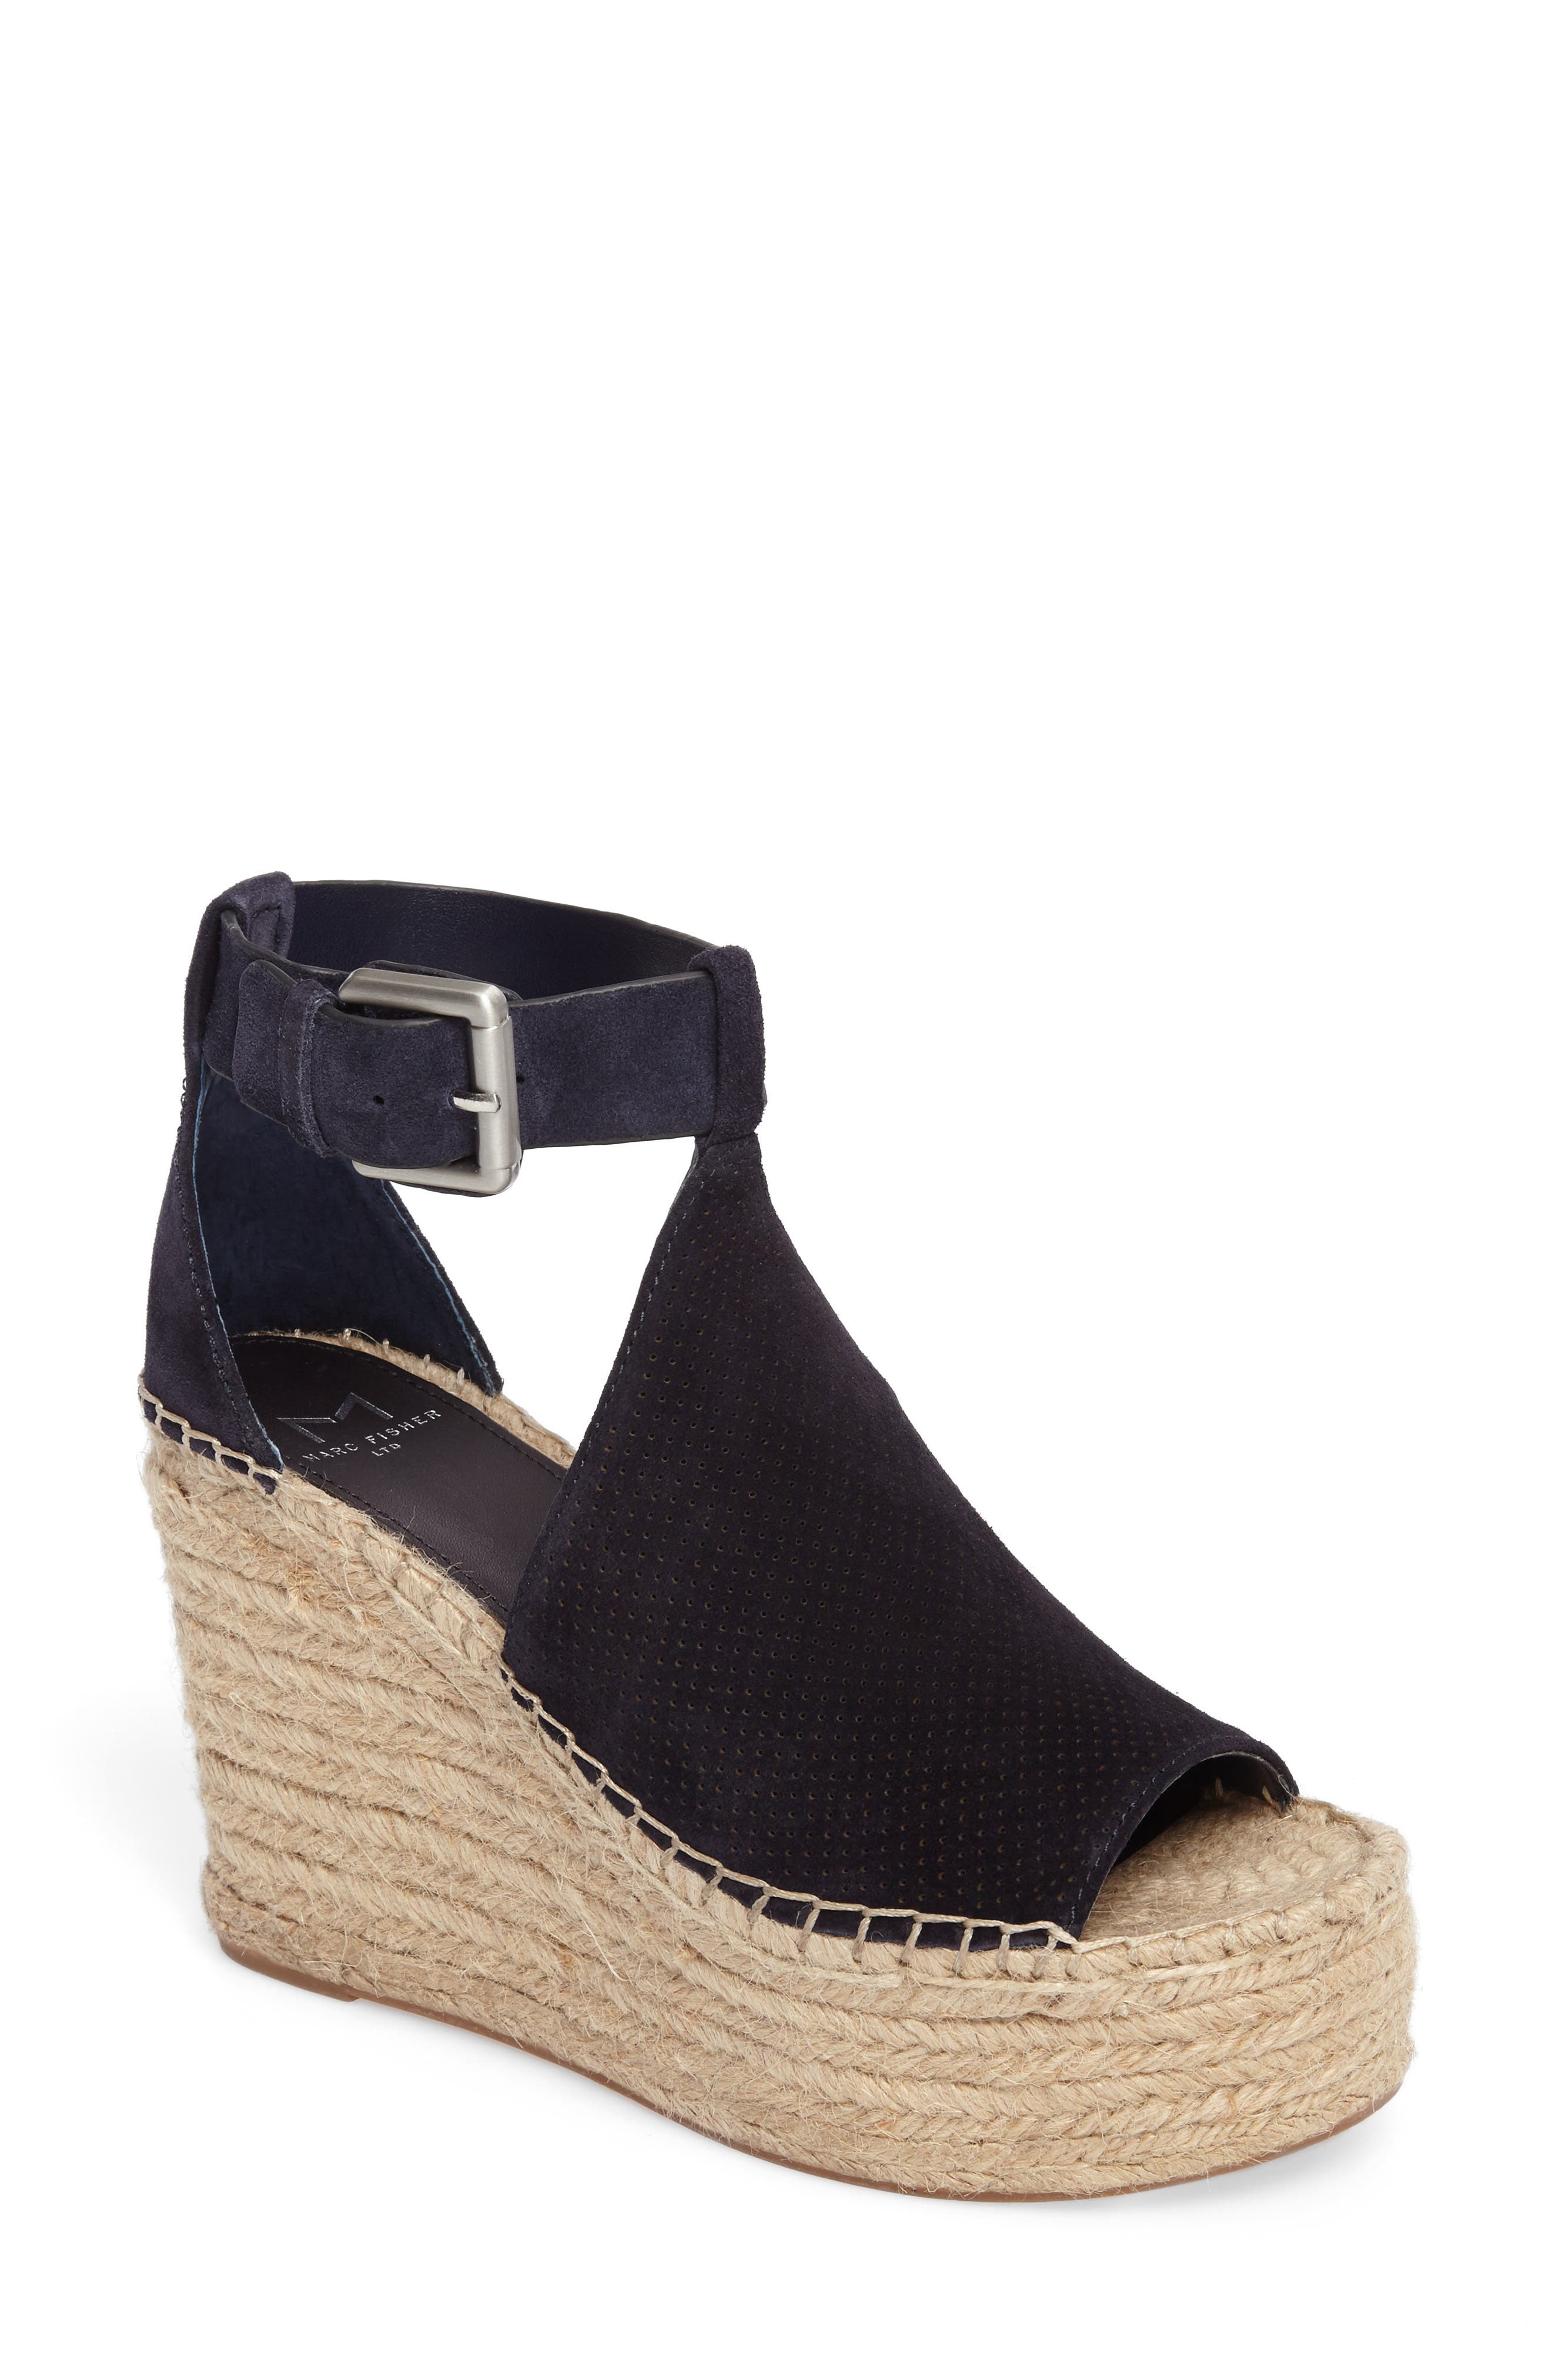 marc fisher shoes wedges